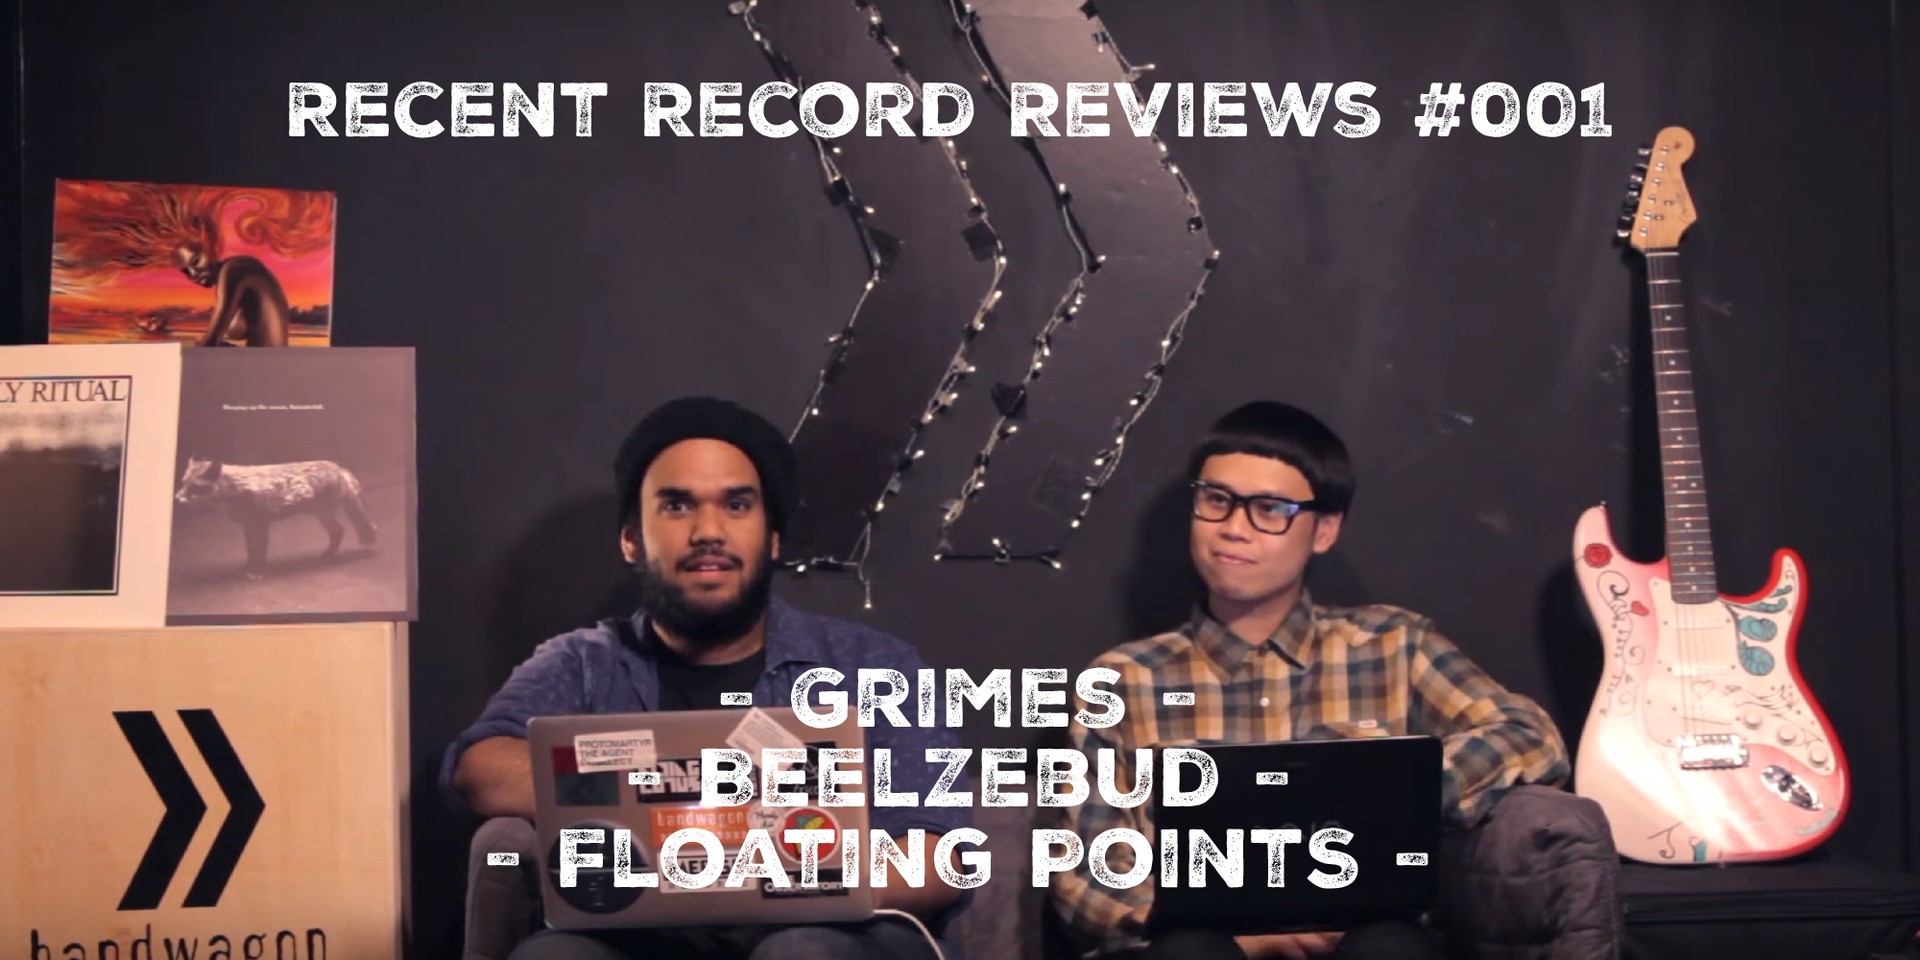 WATCH: Bandwagon Recent Record Reviews #001 - Grimes, Beelzebud, Floating Points 